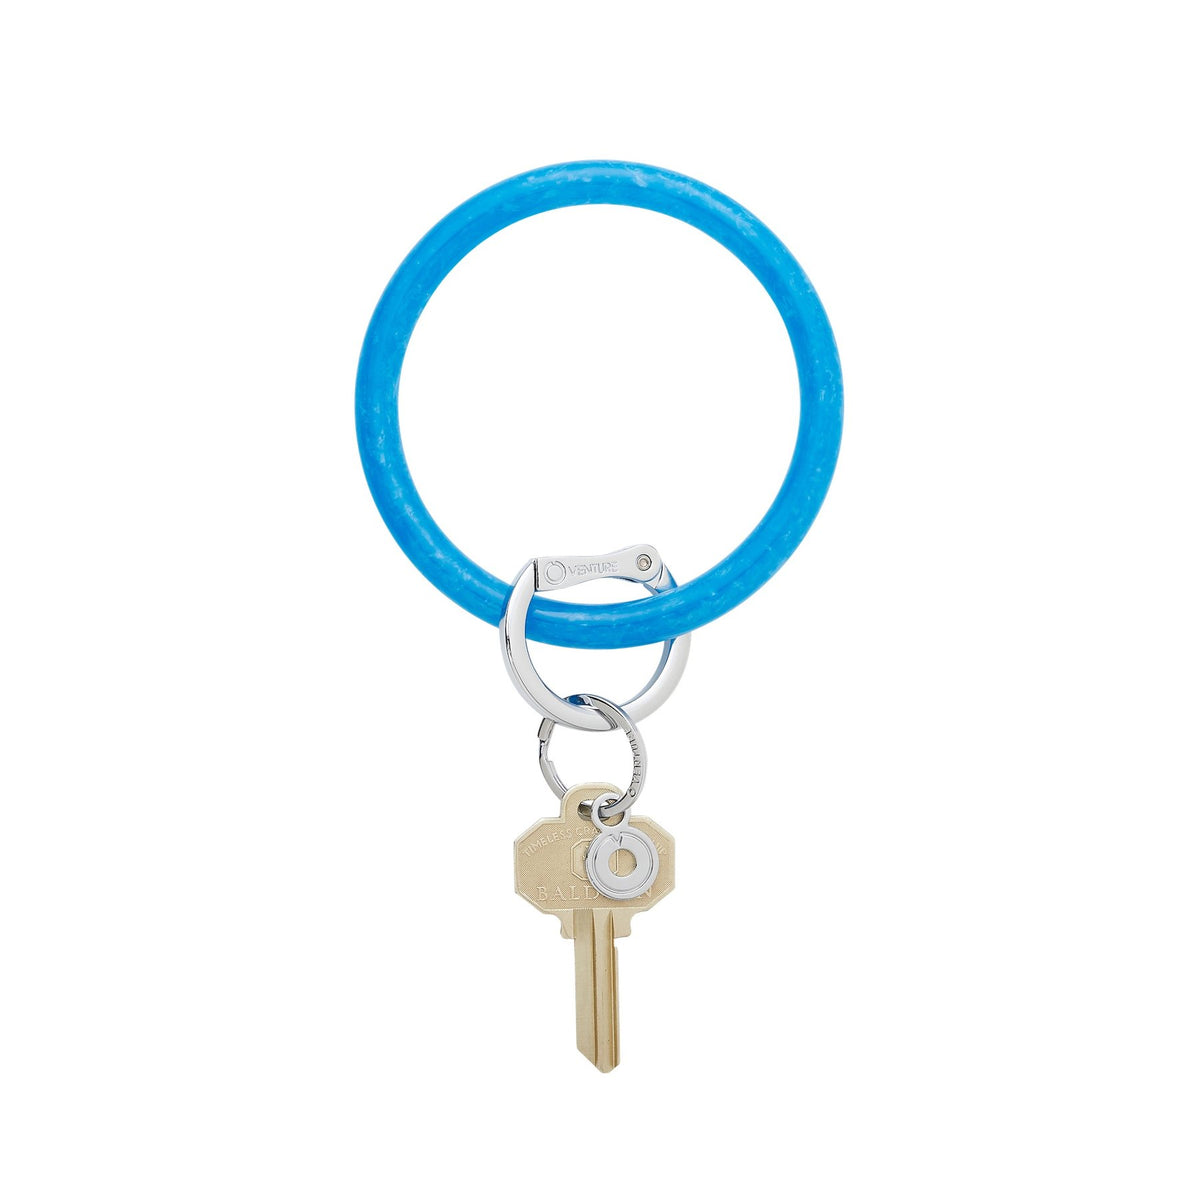 Oventure Big O Resin Key Ring Mind Blowing Blue